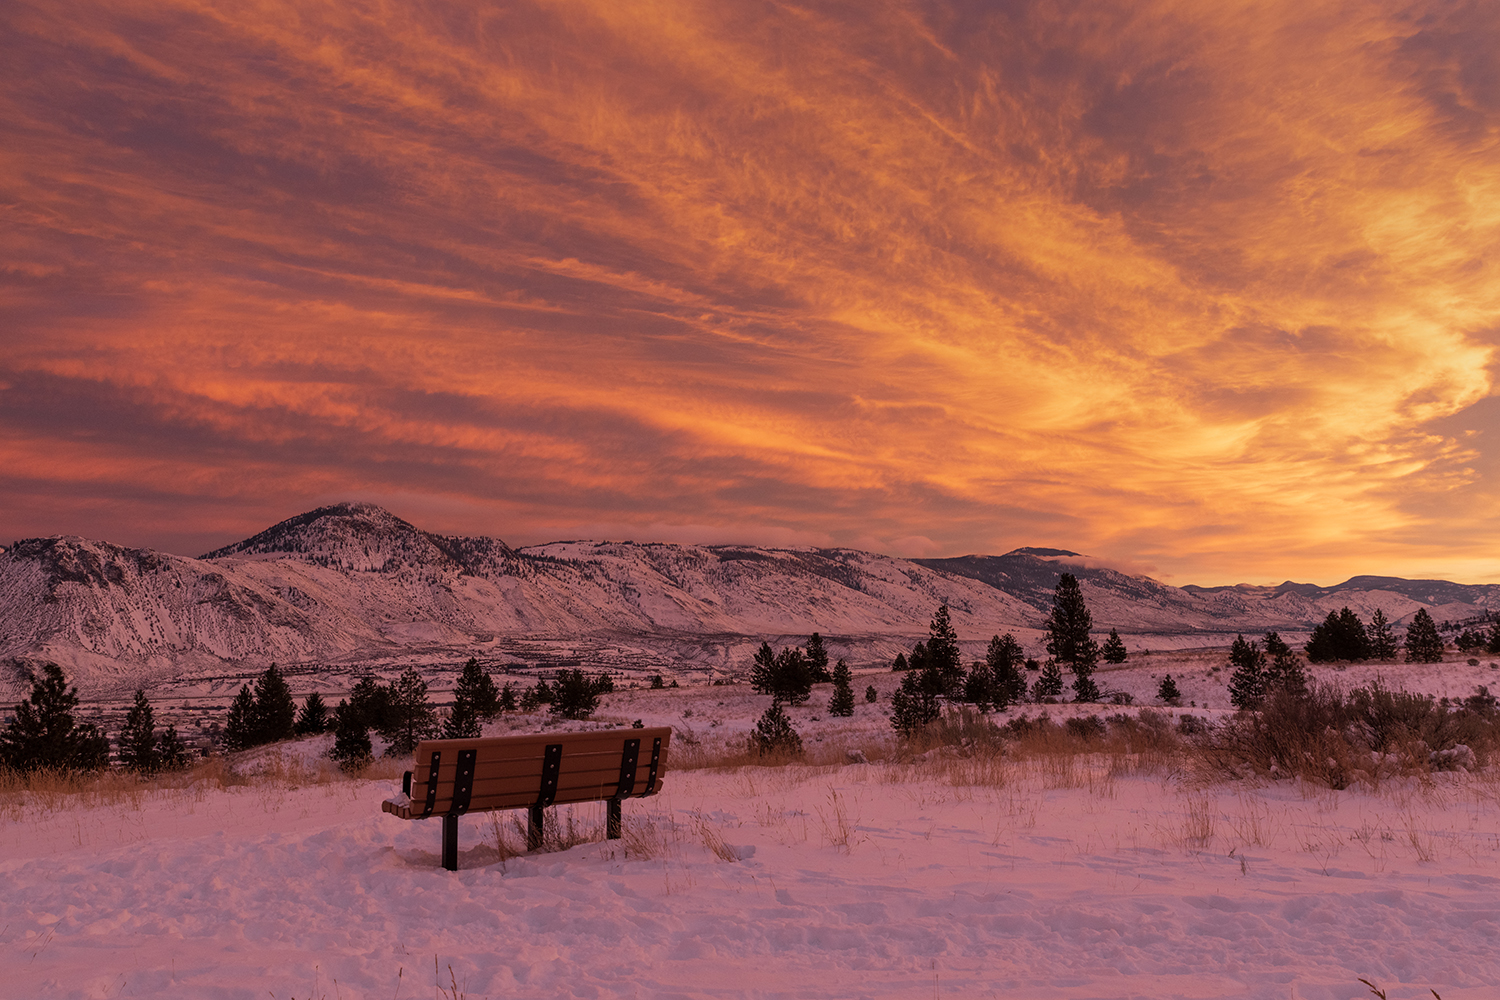 Kamloops Landscape snow with wooden bench and orange and red sky